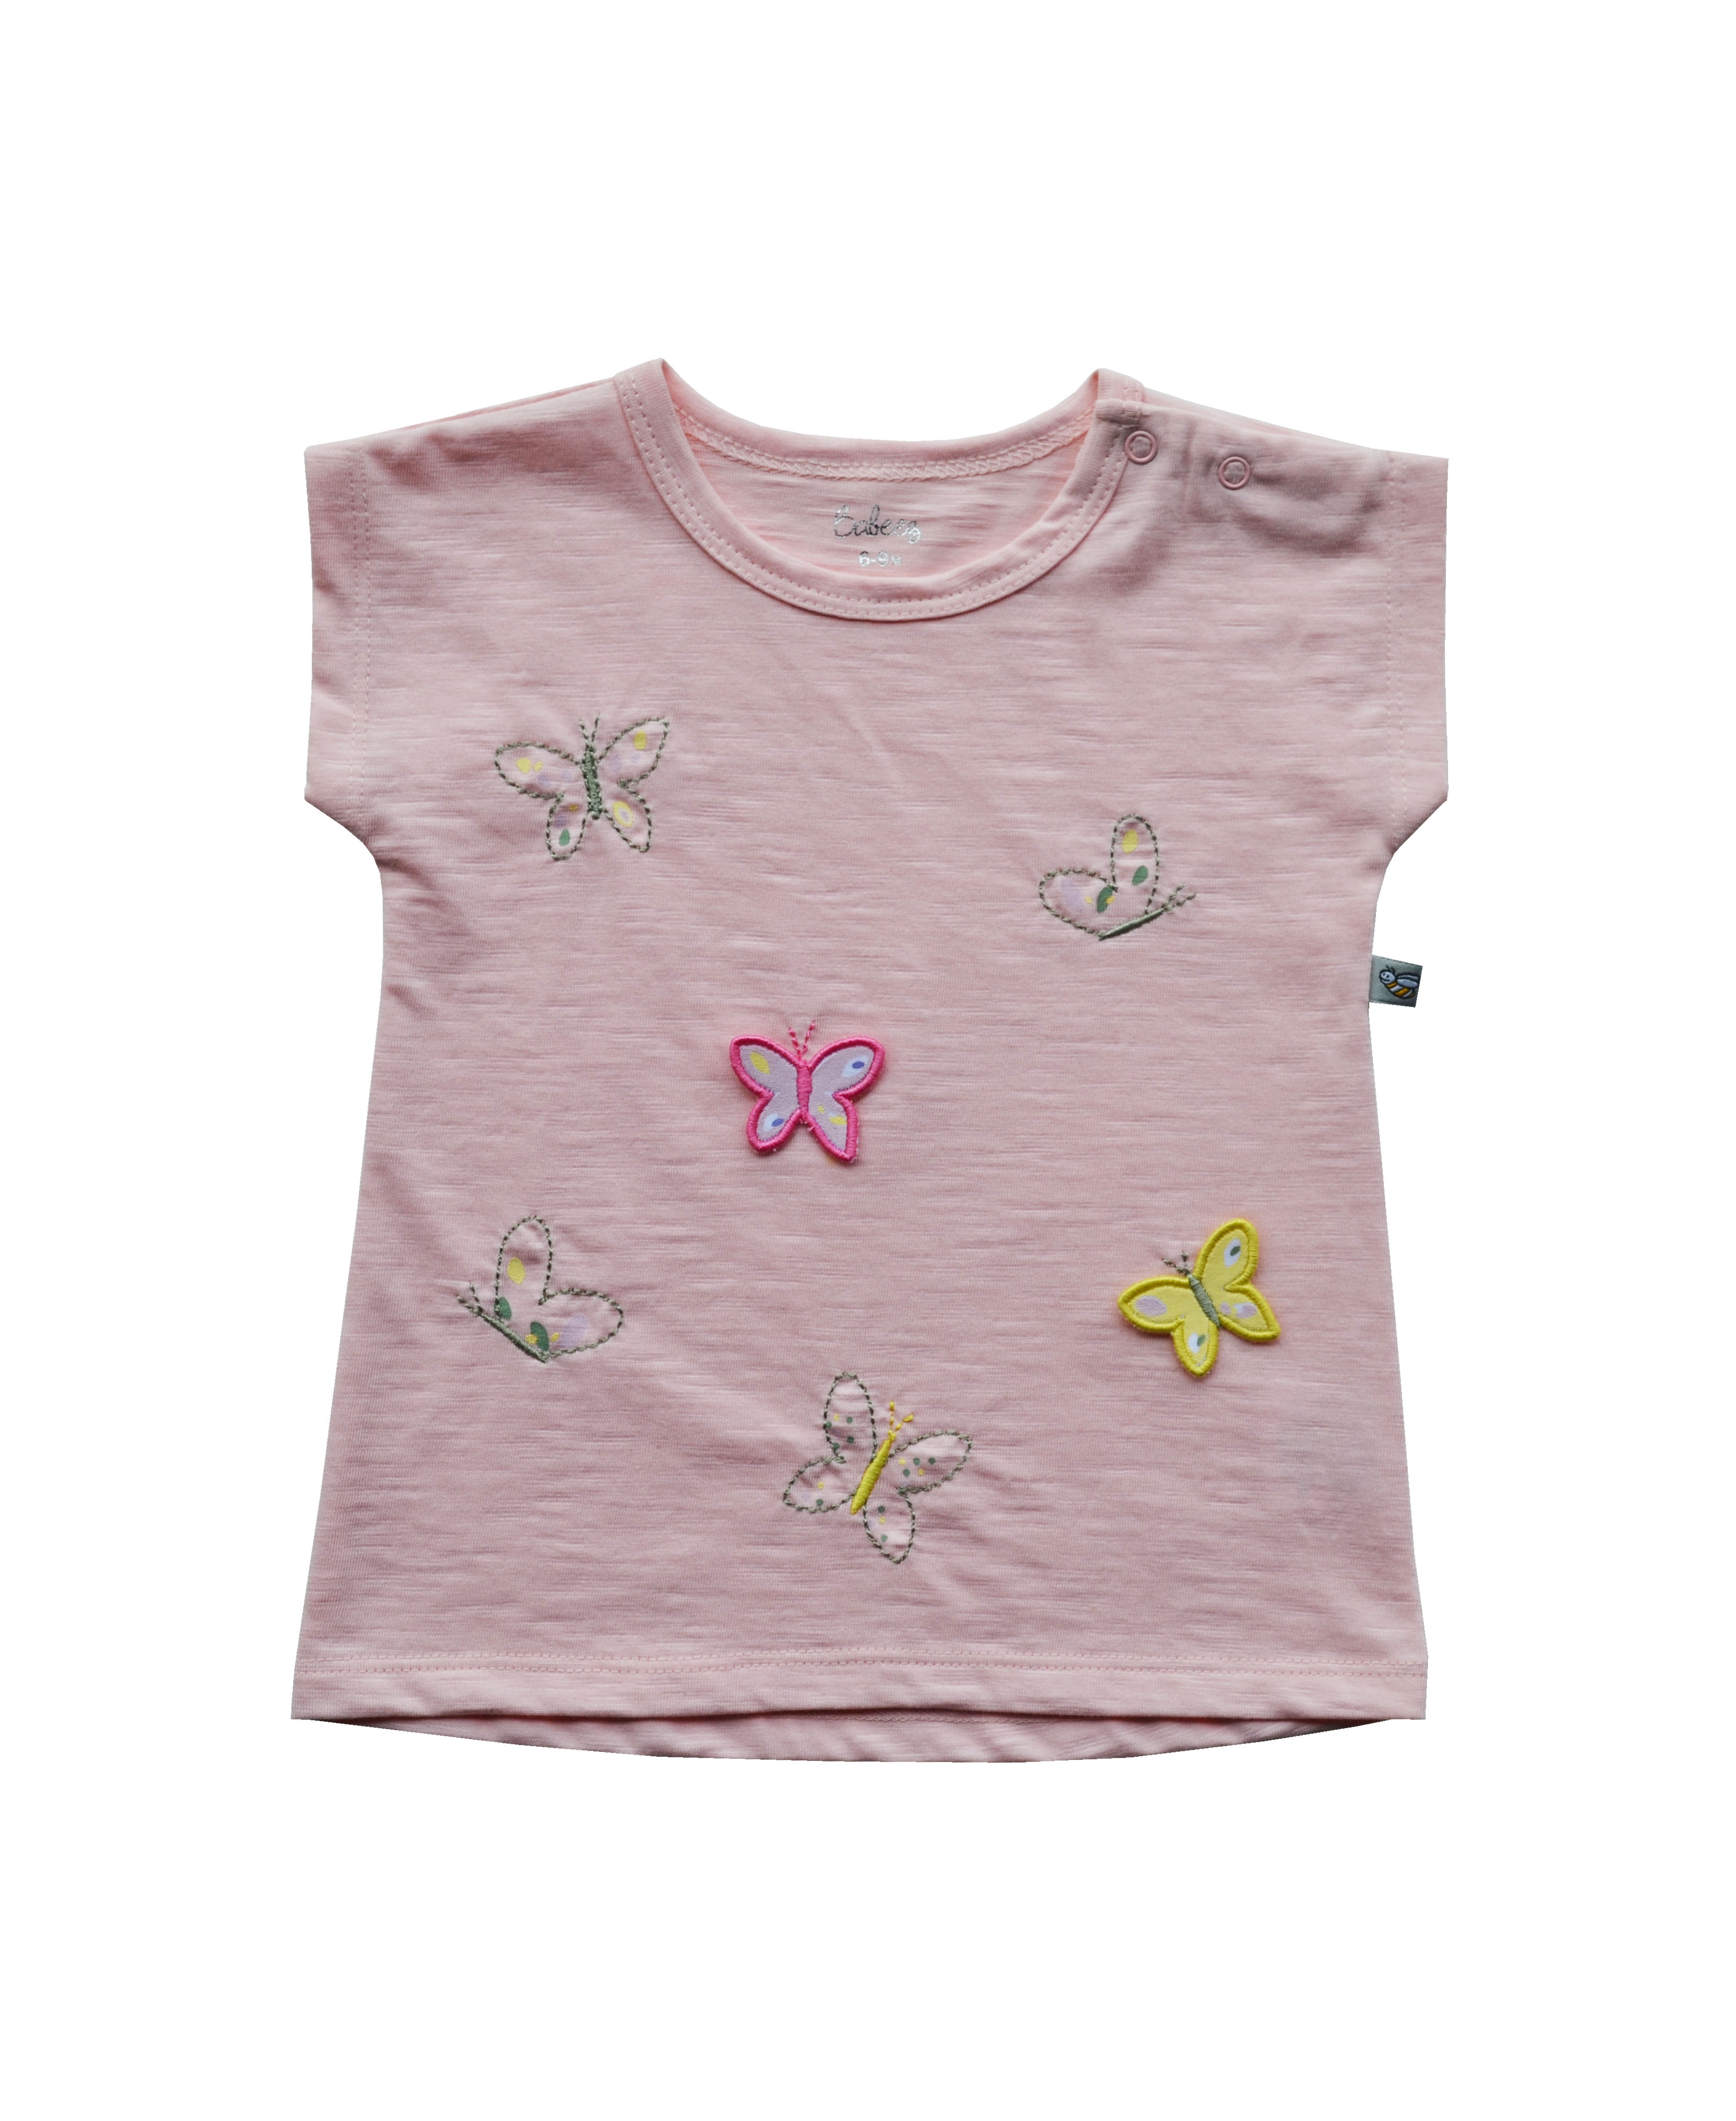 Girls Pink Top with Butterfly Applique (Slub Jersey)